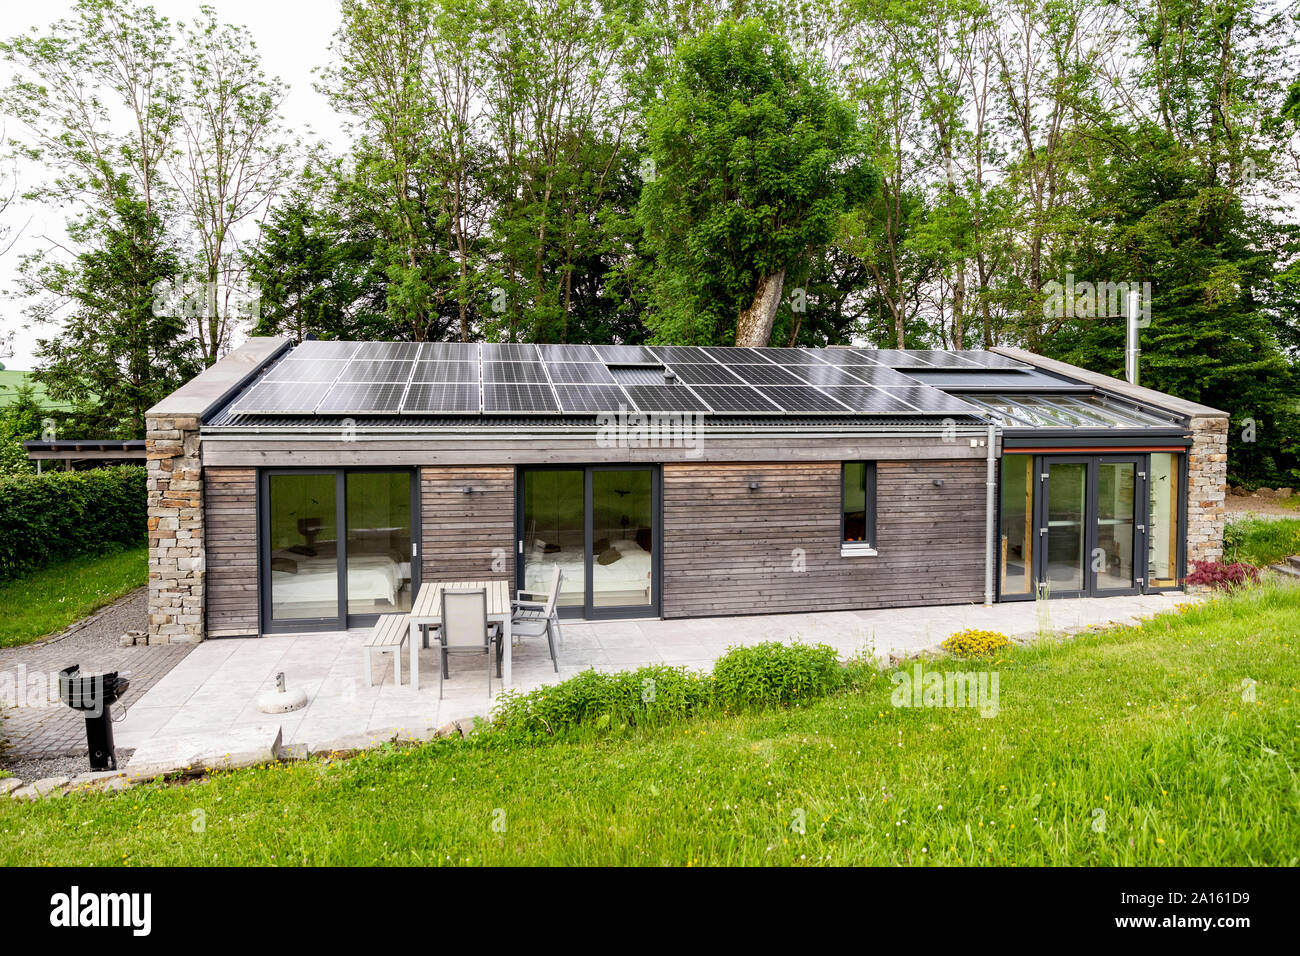 Detached house with solar panels on the roof Stock Photo